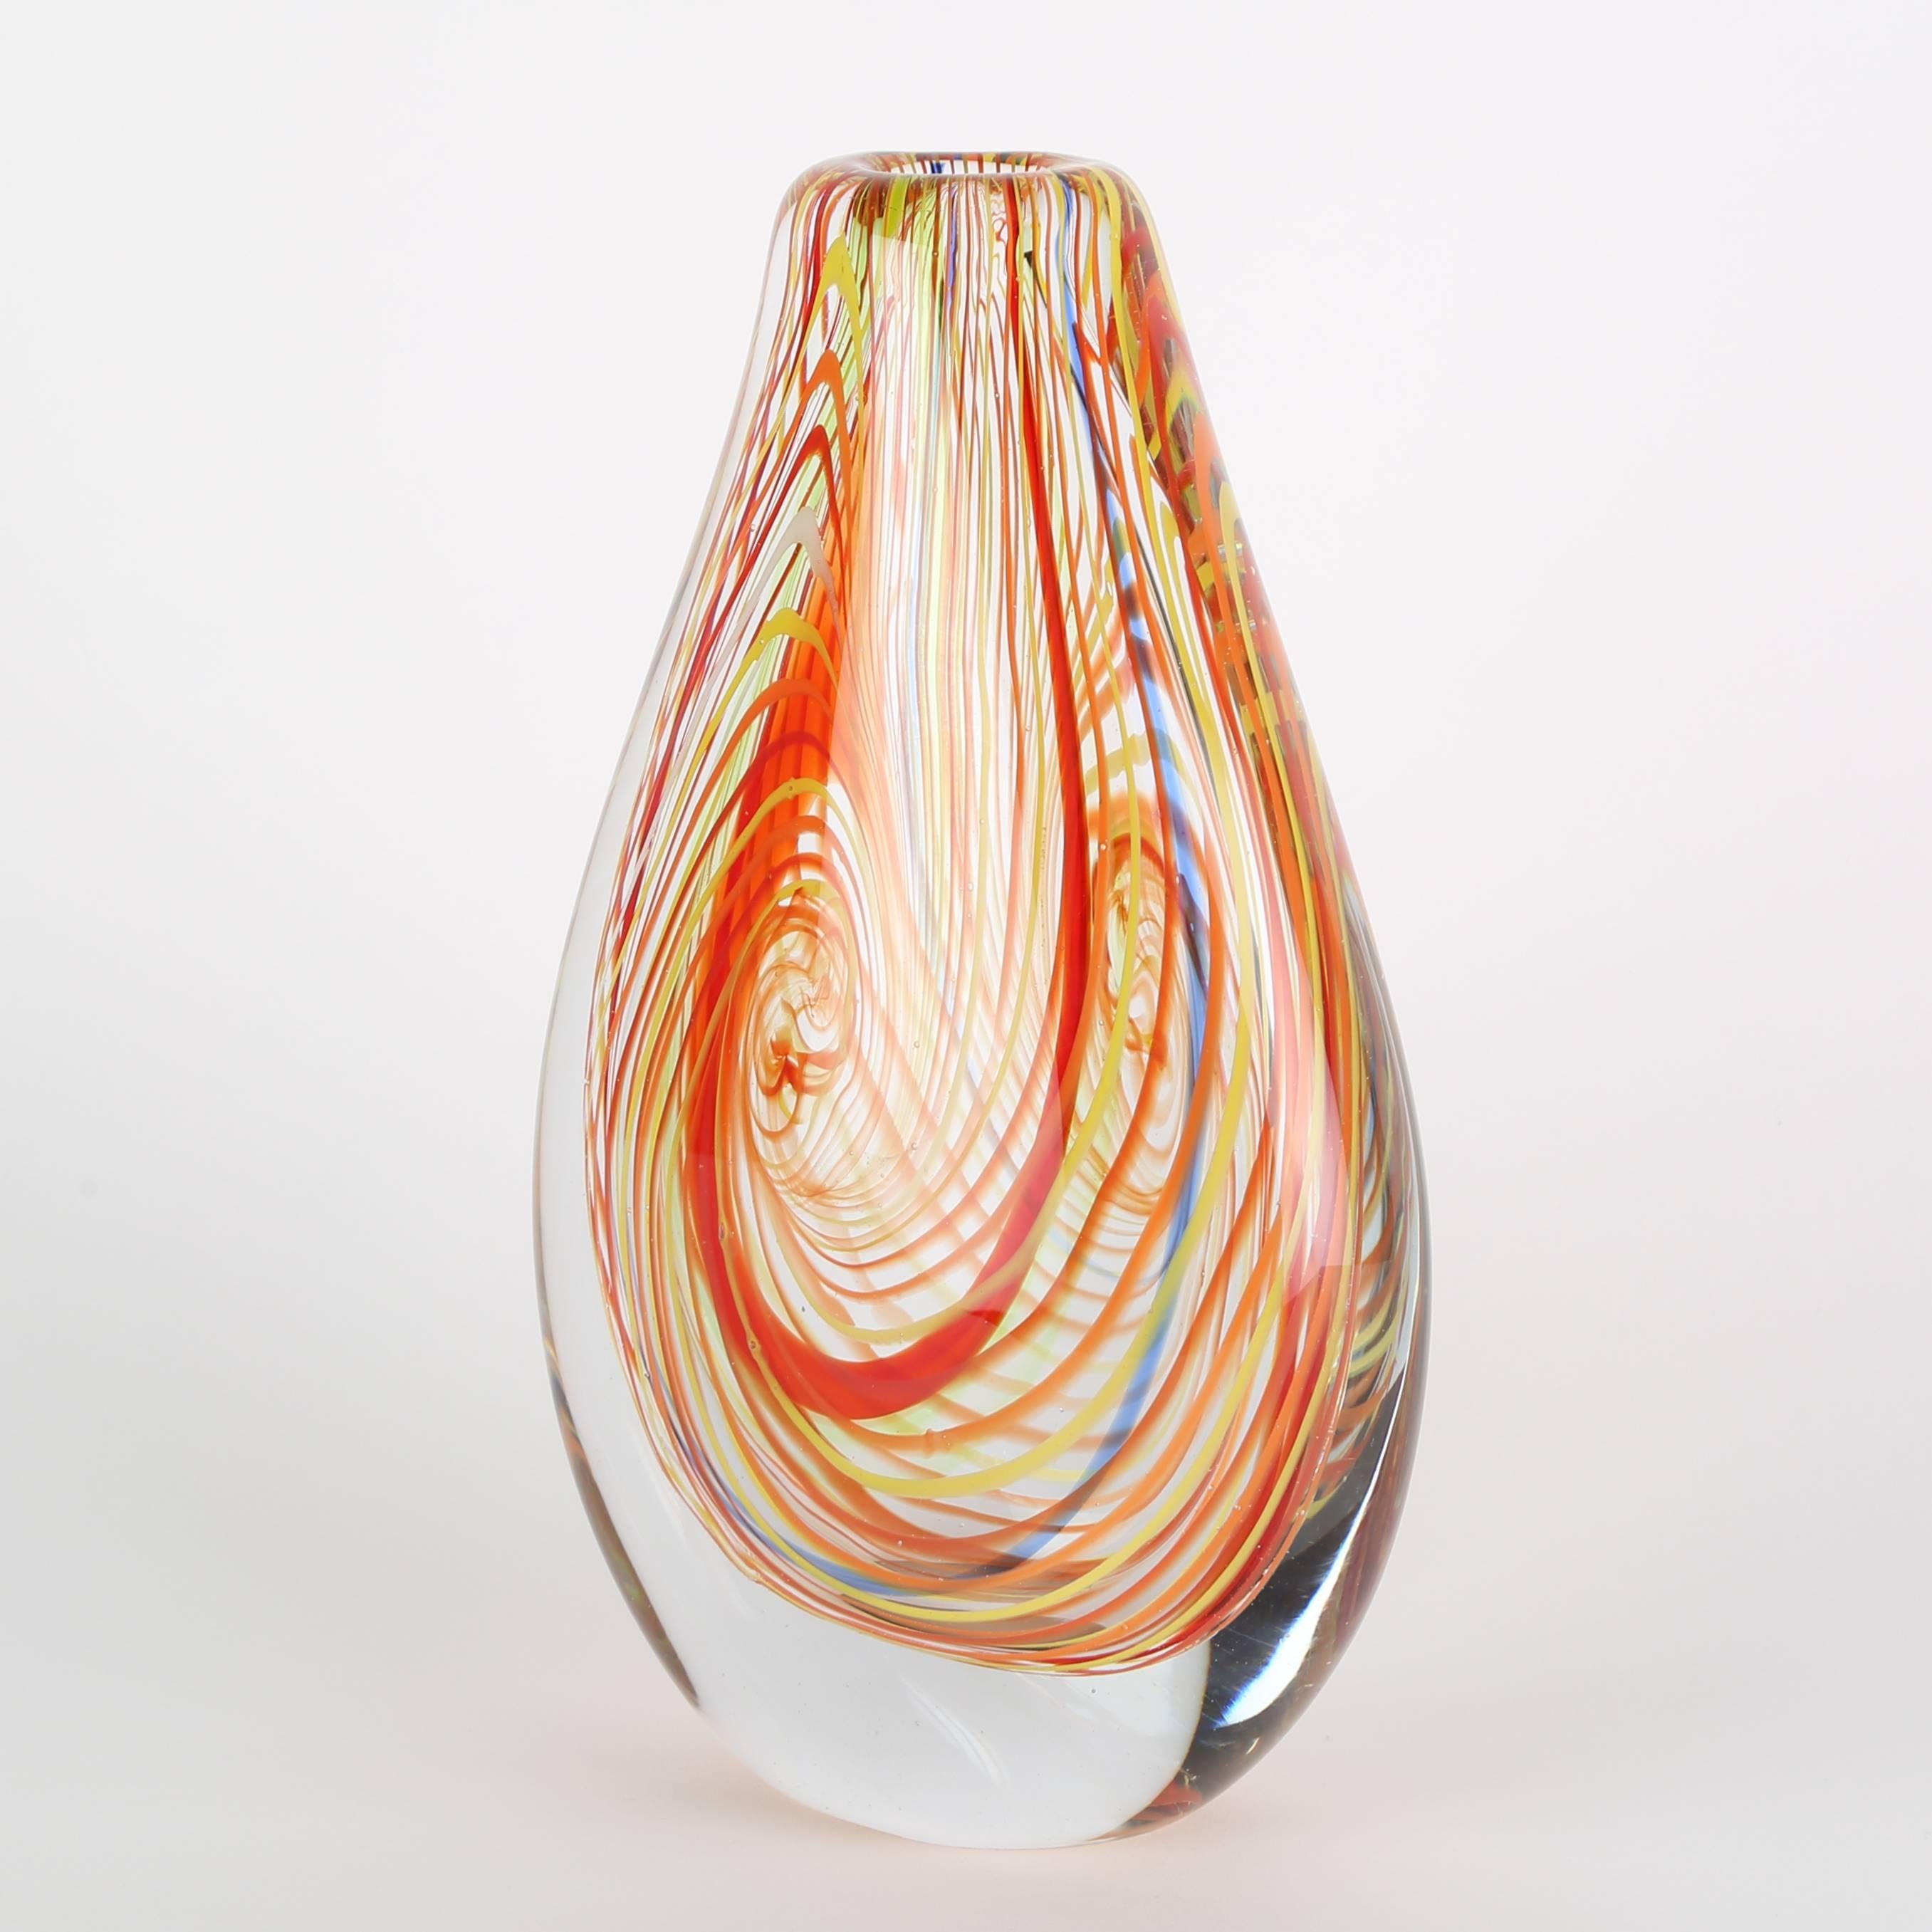 Large and beautifully crafted Murano glass vase featuring swirls of orange, red, yellow and blue set in clear glass.  This item is at the 1stdibs Gallery at the New York Design Center, 200 Lexington Ave., 10th floor, New York, NY.